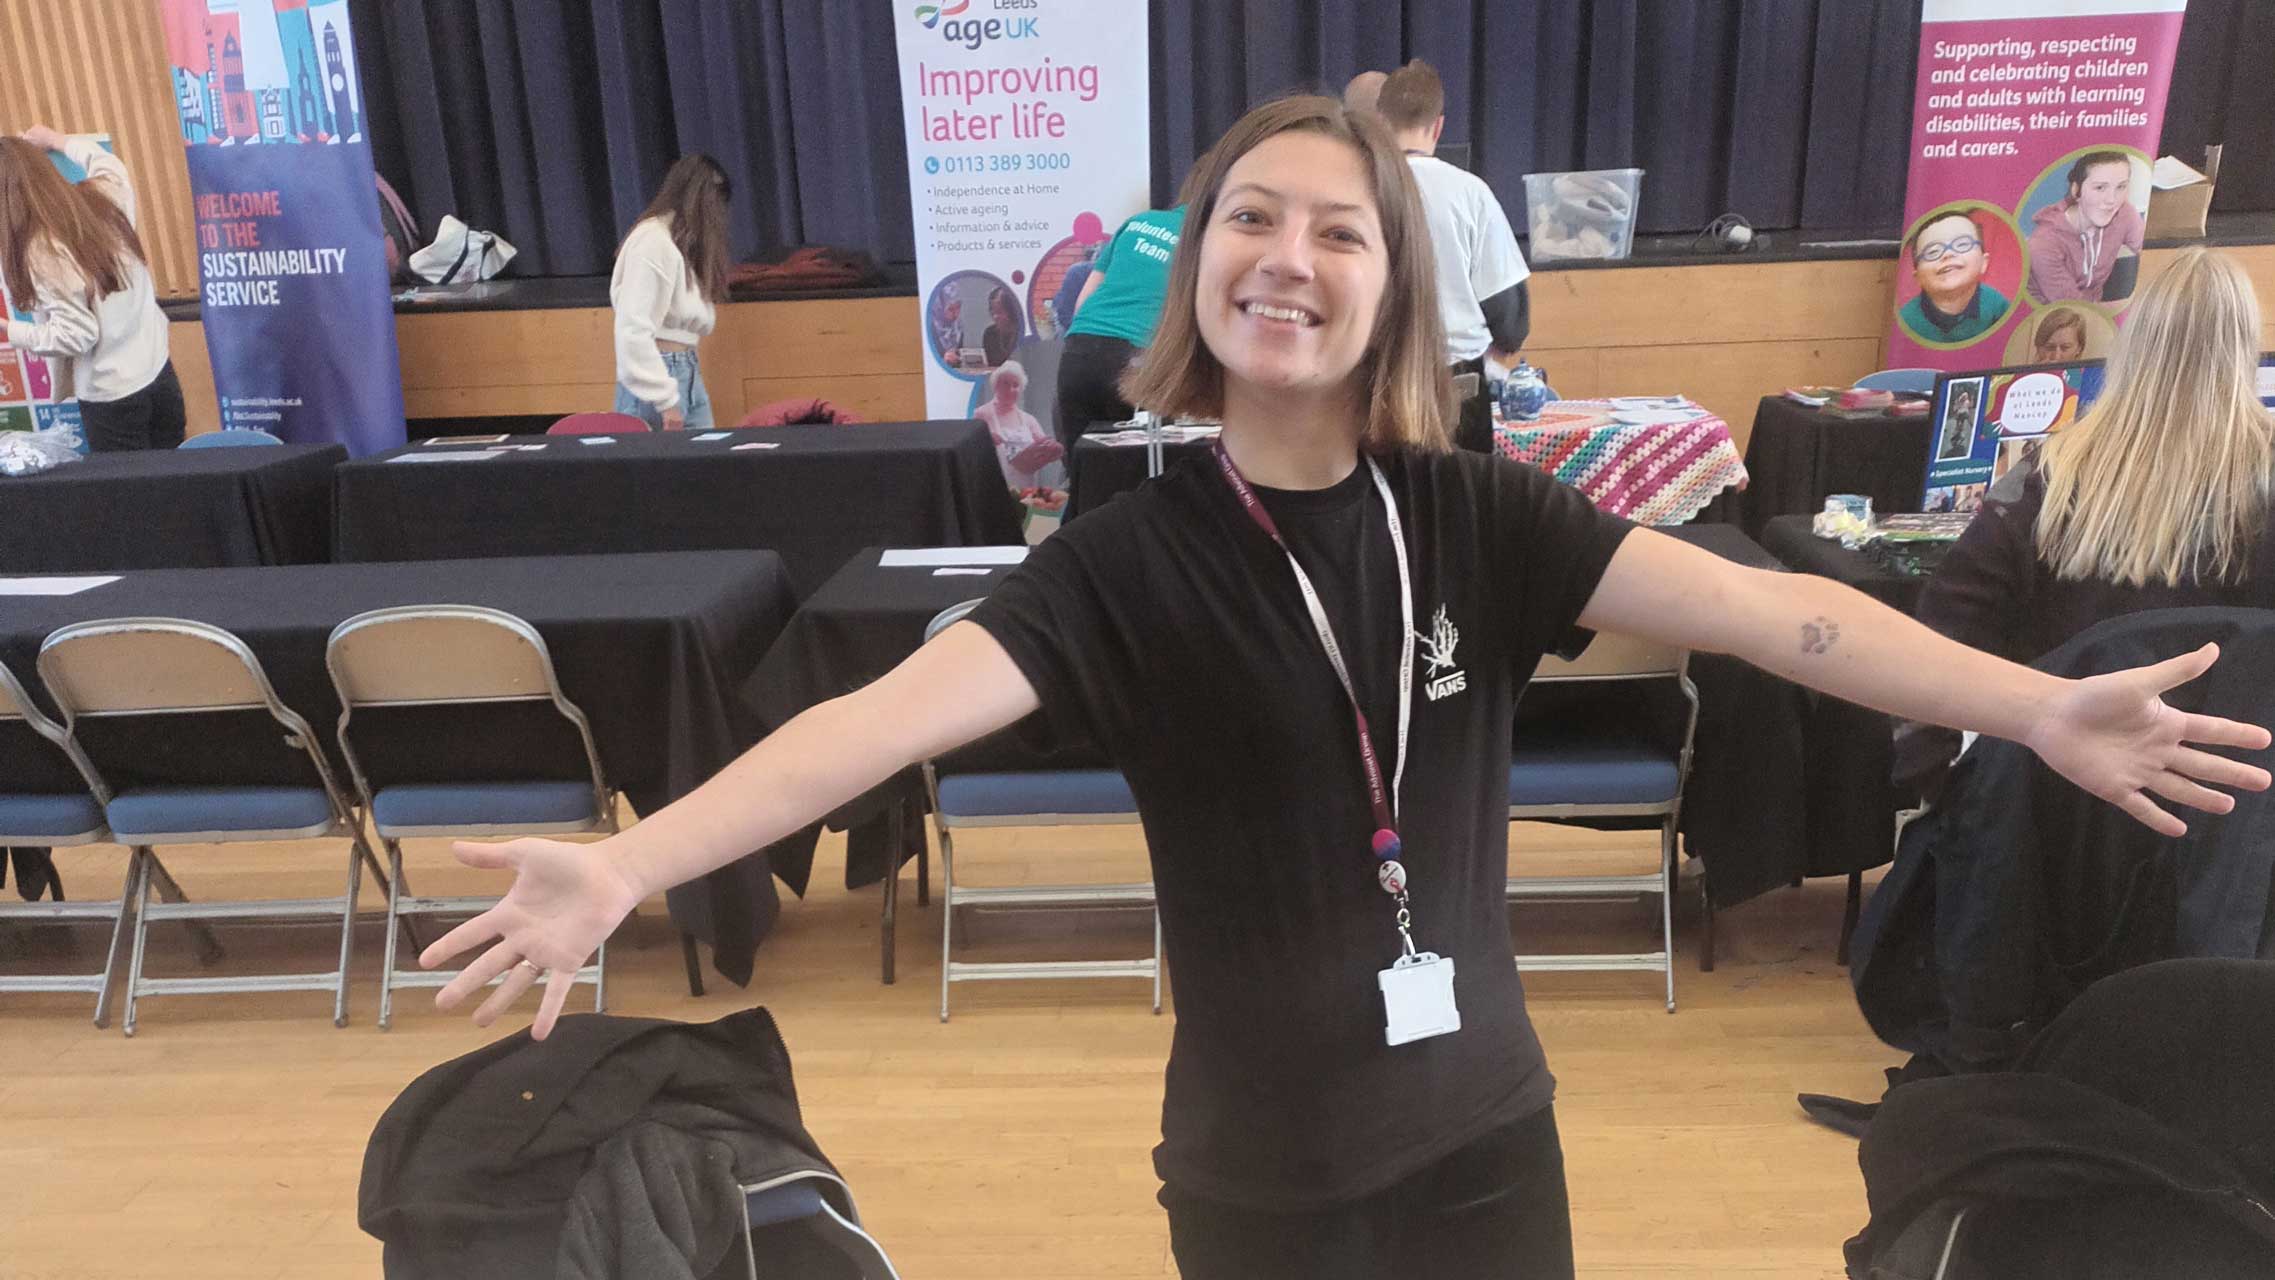 Beth, our Volunteer Coordinator, with her arms outstretched while in front of a stall at an event.